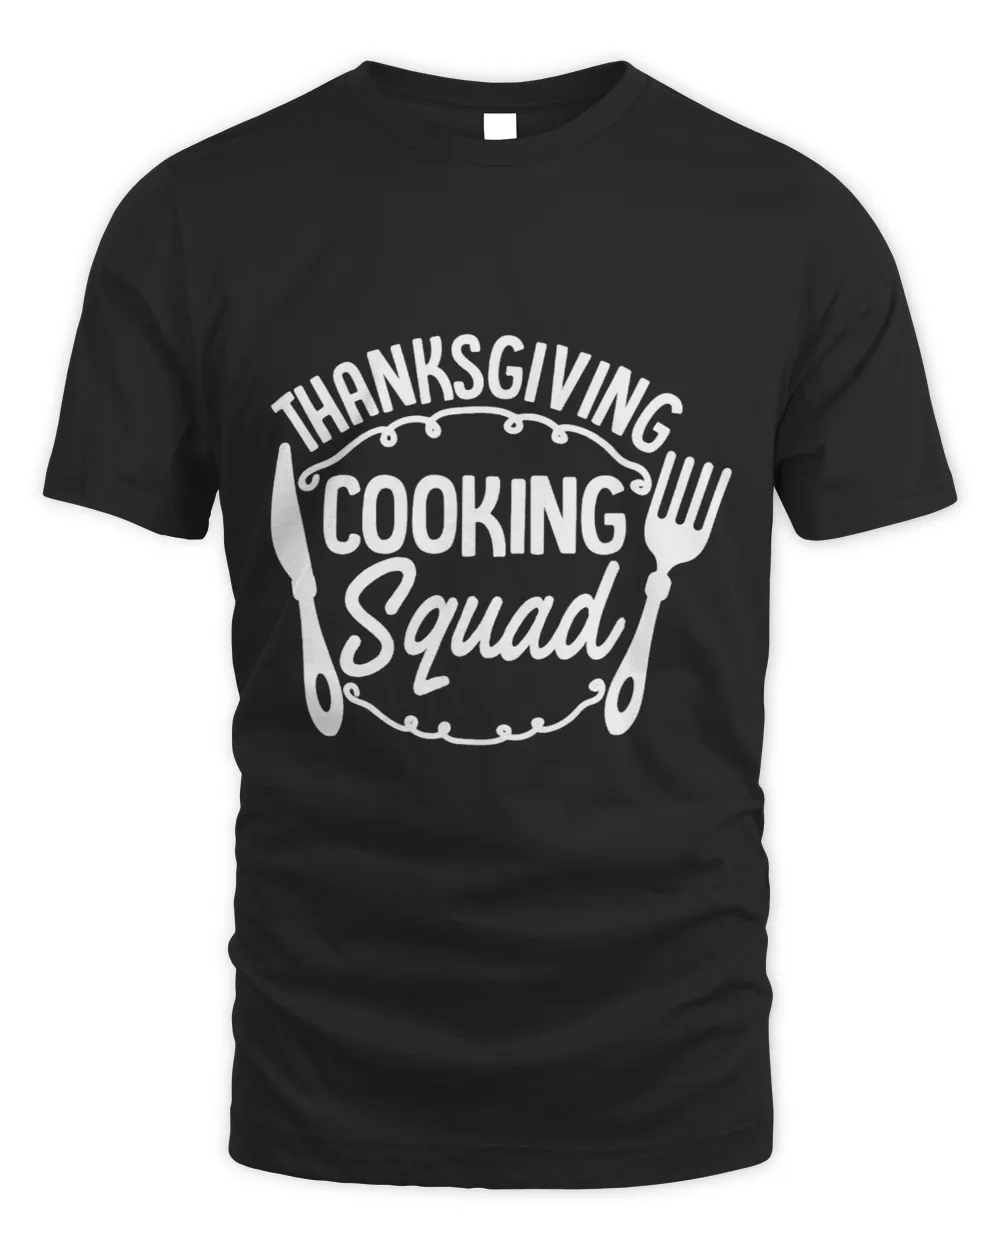 Thanksgiving Cooking Squad Cooking Team Funny Chef Team